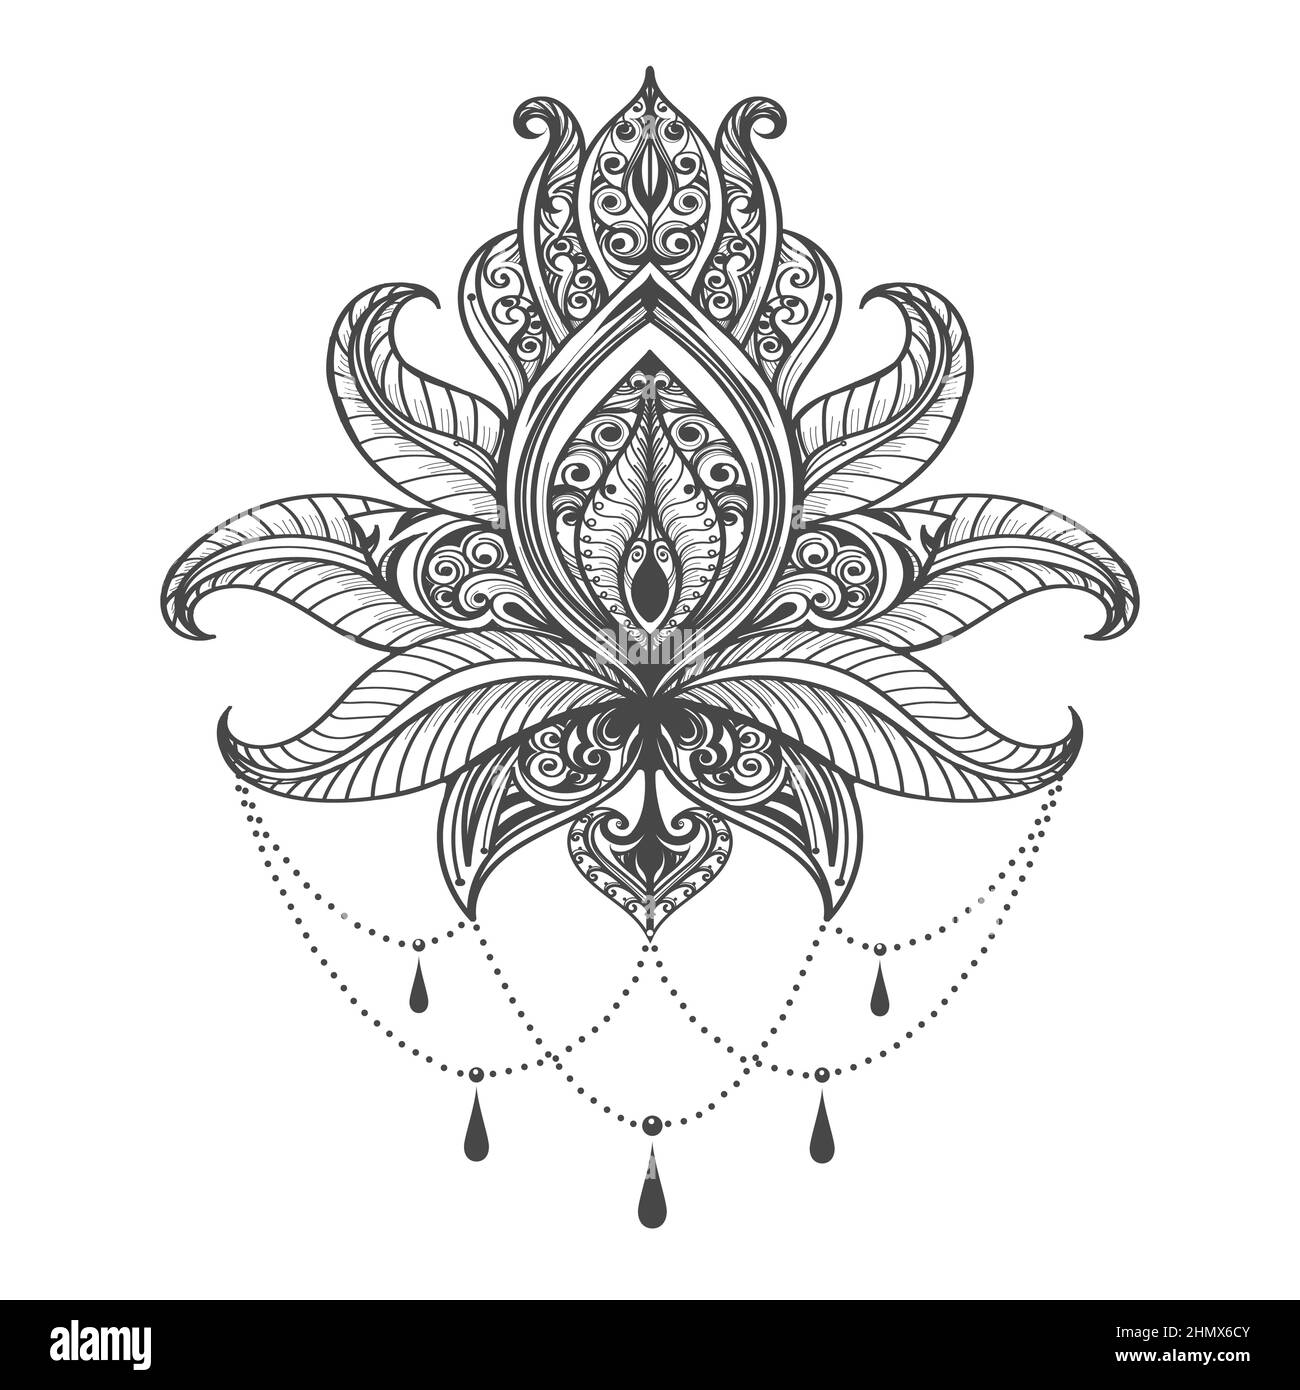 Lotus flower tattoo Cut Out Stock Images & Pictures - Alamy